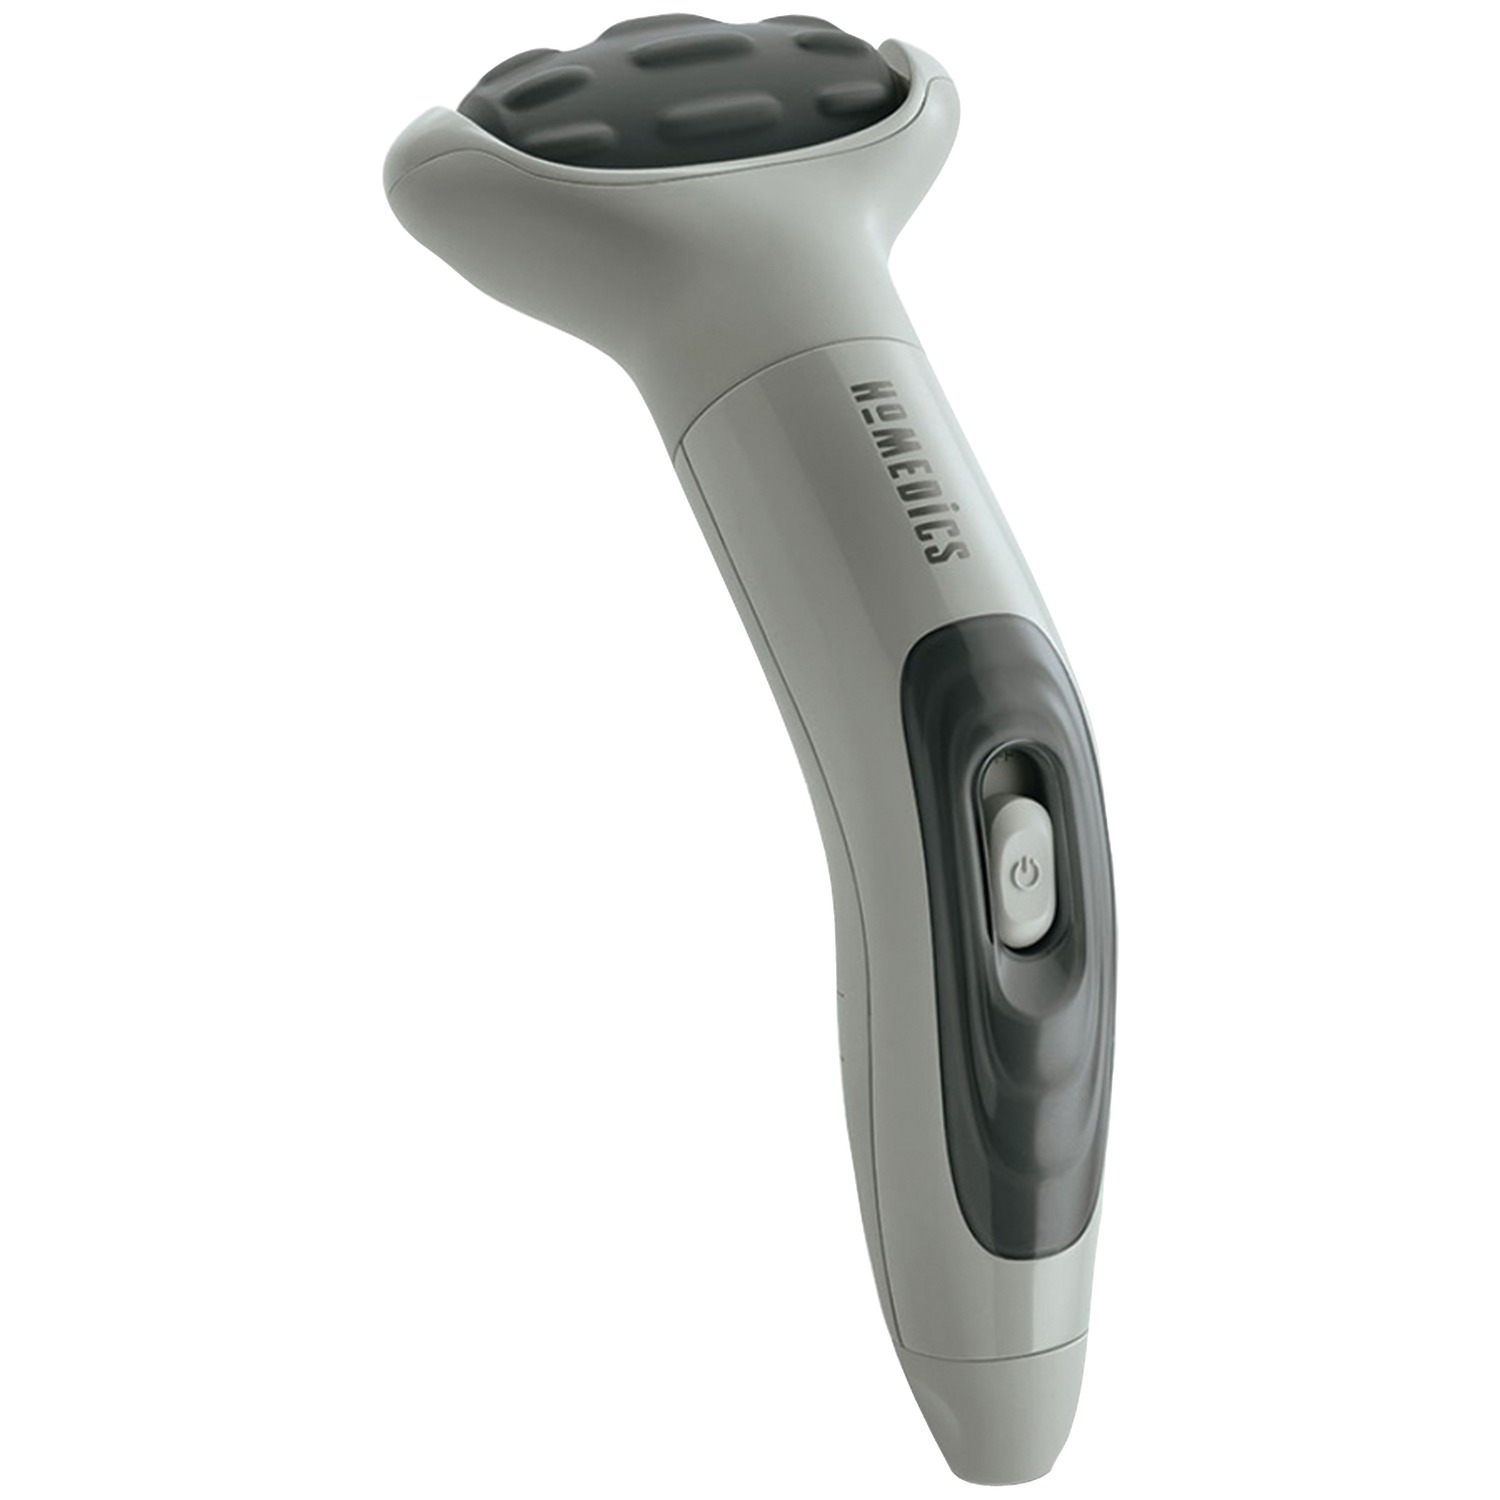 HoMedics Thera-P Body Massager With Perfect Reach Handle, HHP-110-THP - image 1 of 9